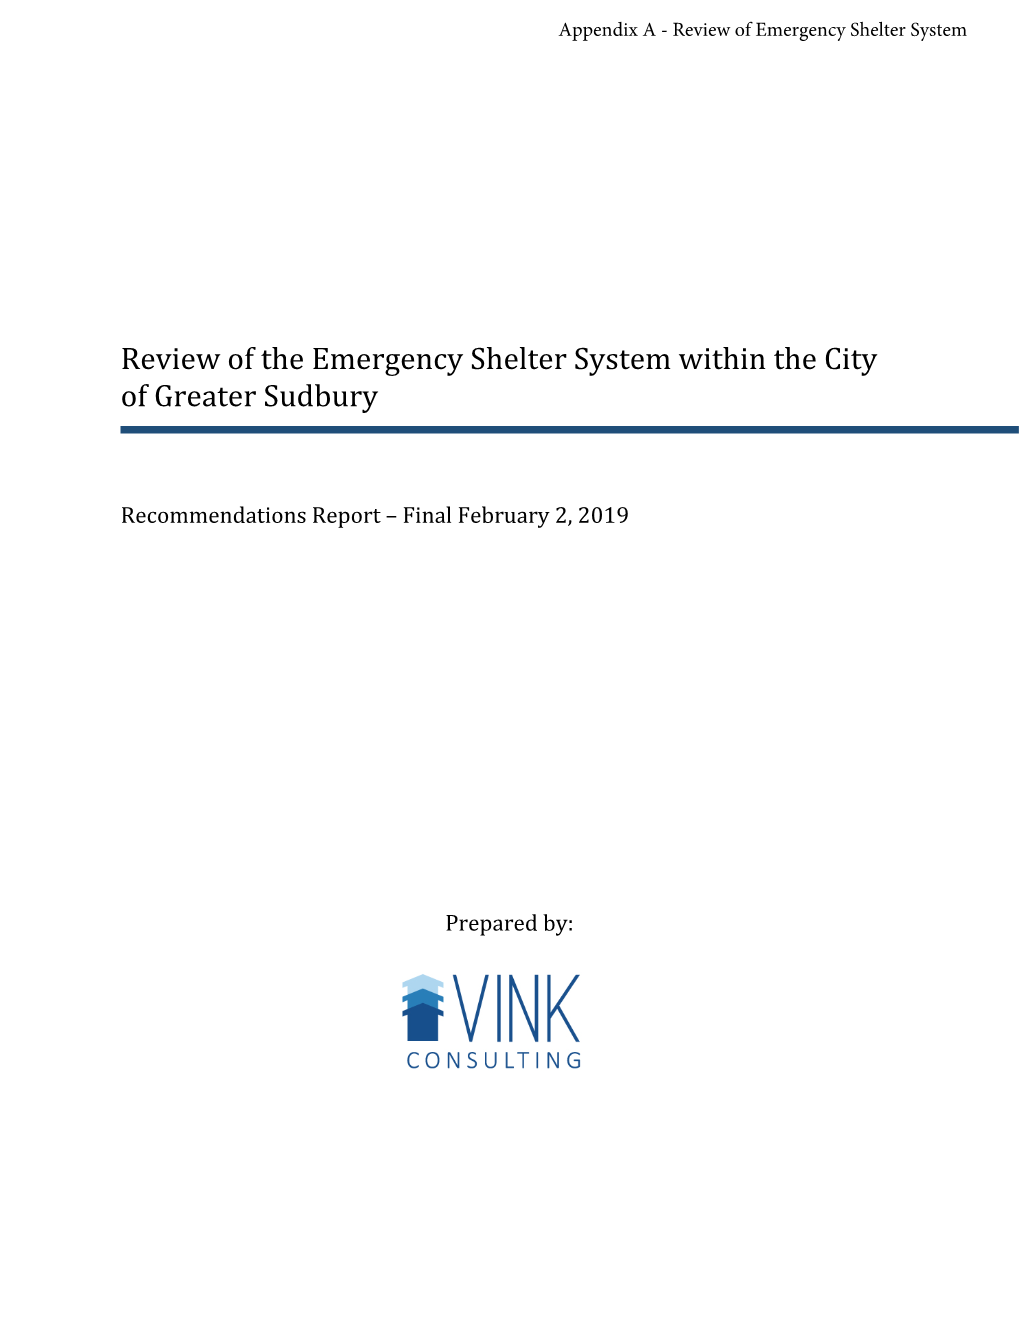 Review of the Emergency Shelter System Within the City of Greater Sudbury